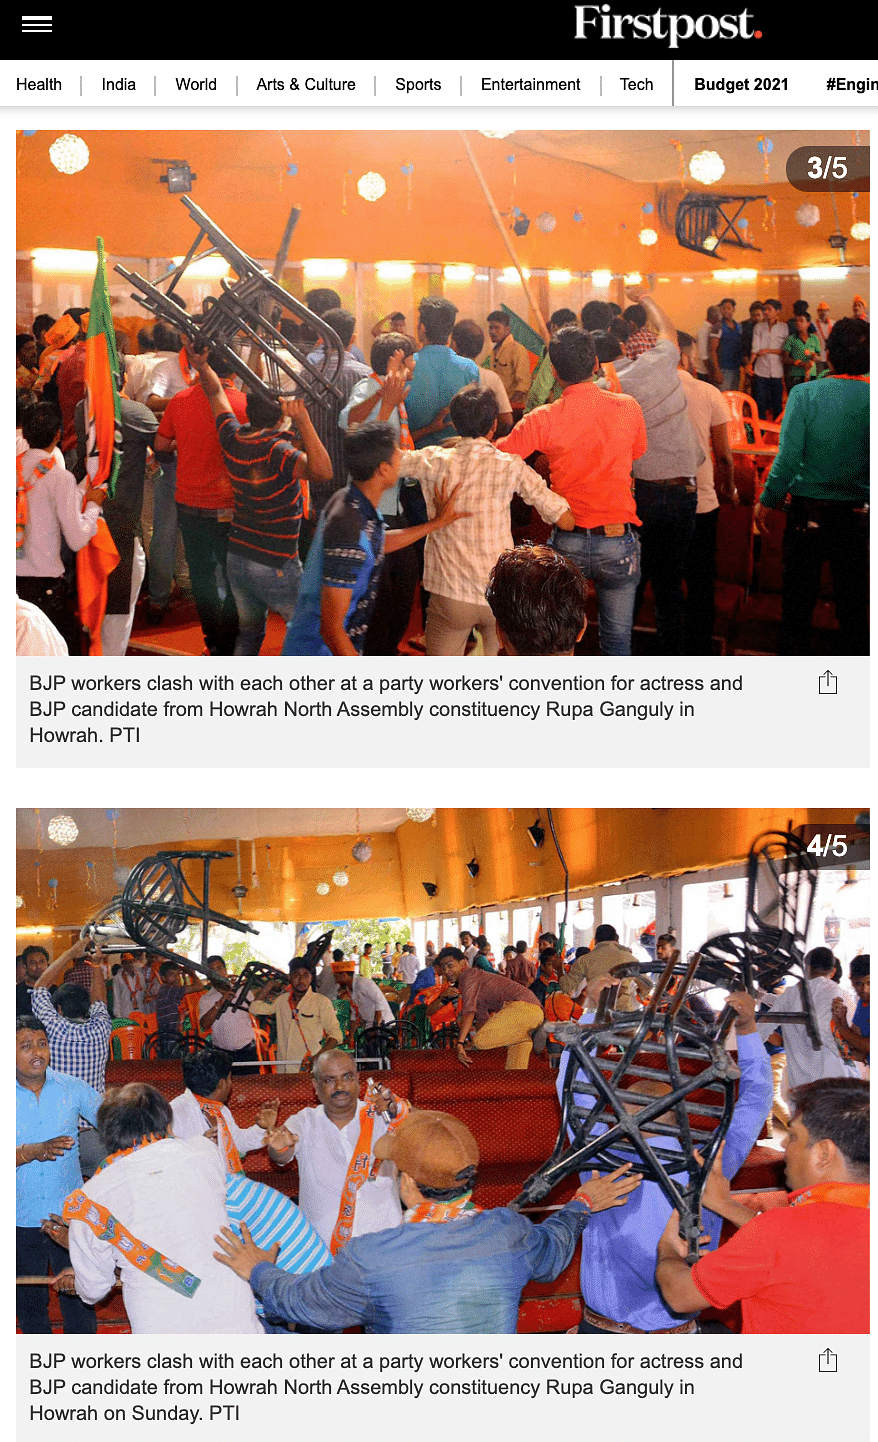 The images are from 2016 and show BJP workers clashing with each other in Howrah (North).